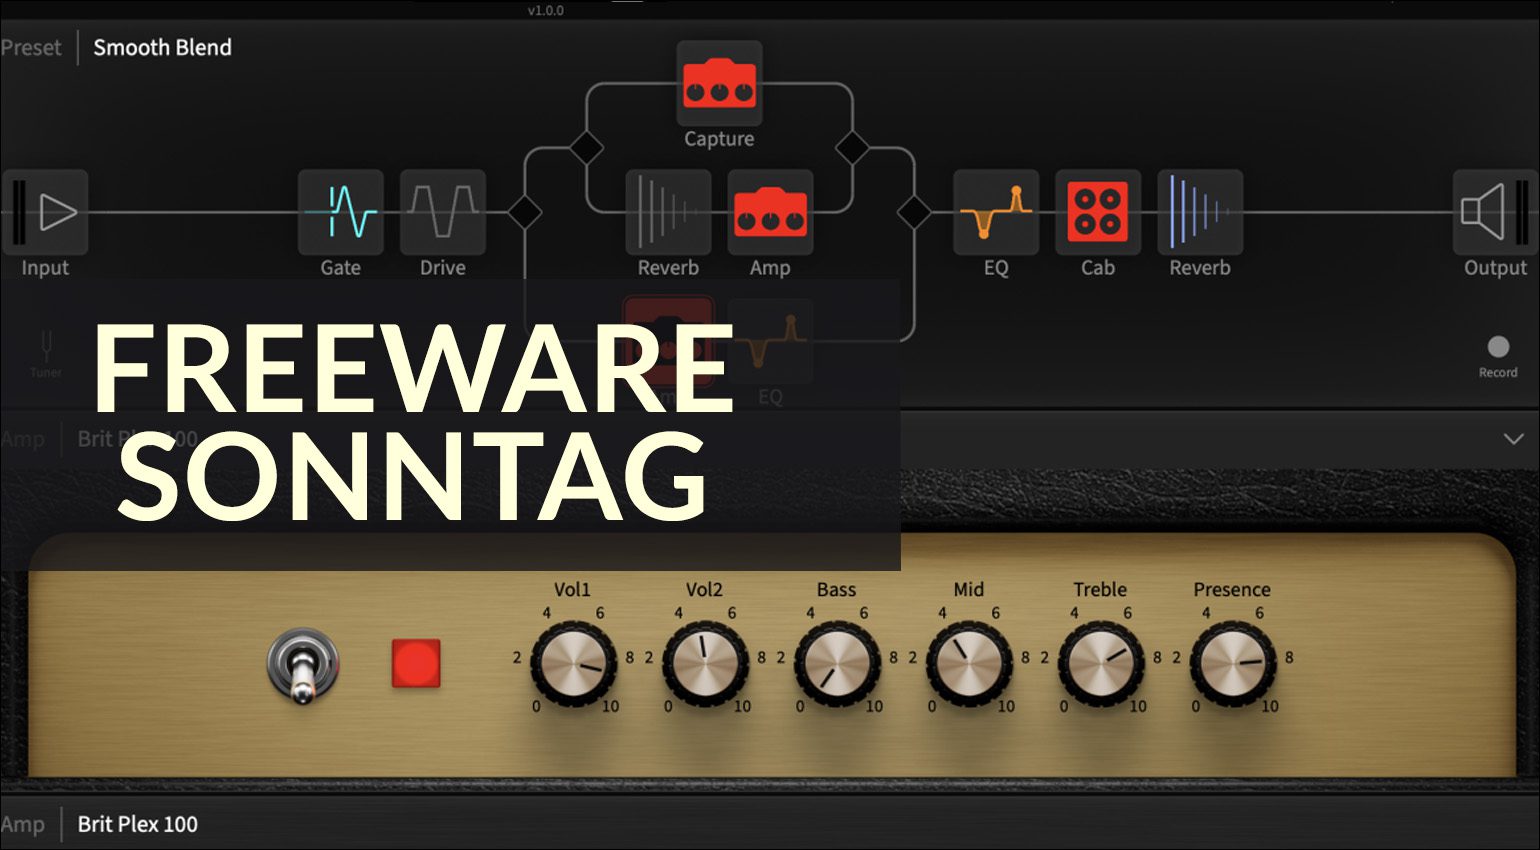 Tonocracy, Eugene Filter, and Wave are in freeware on Sunday